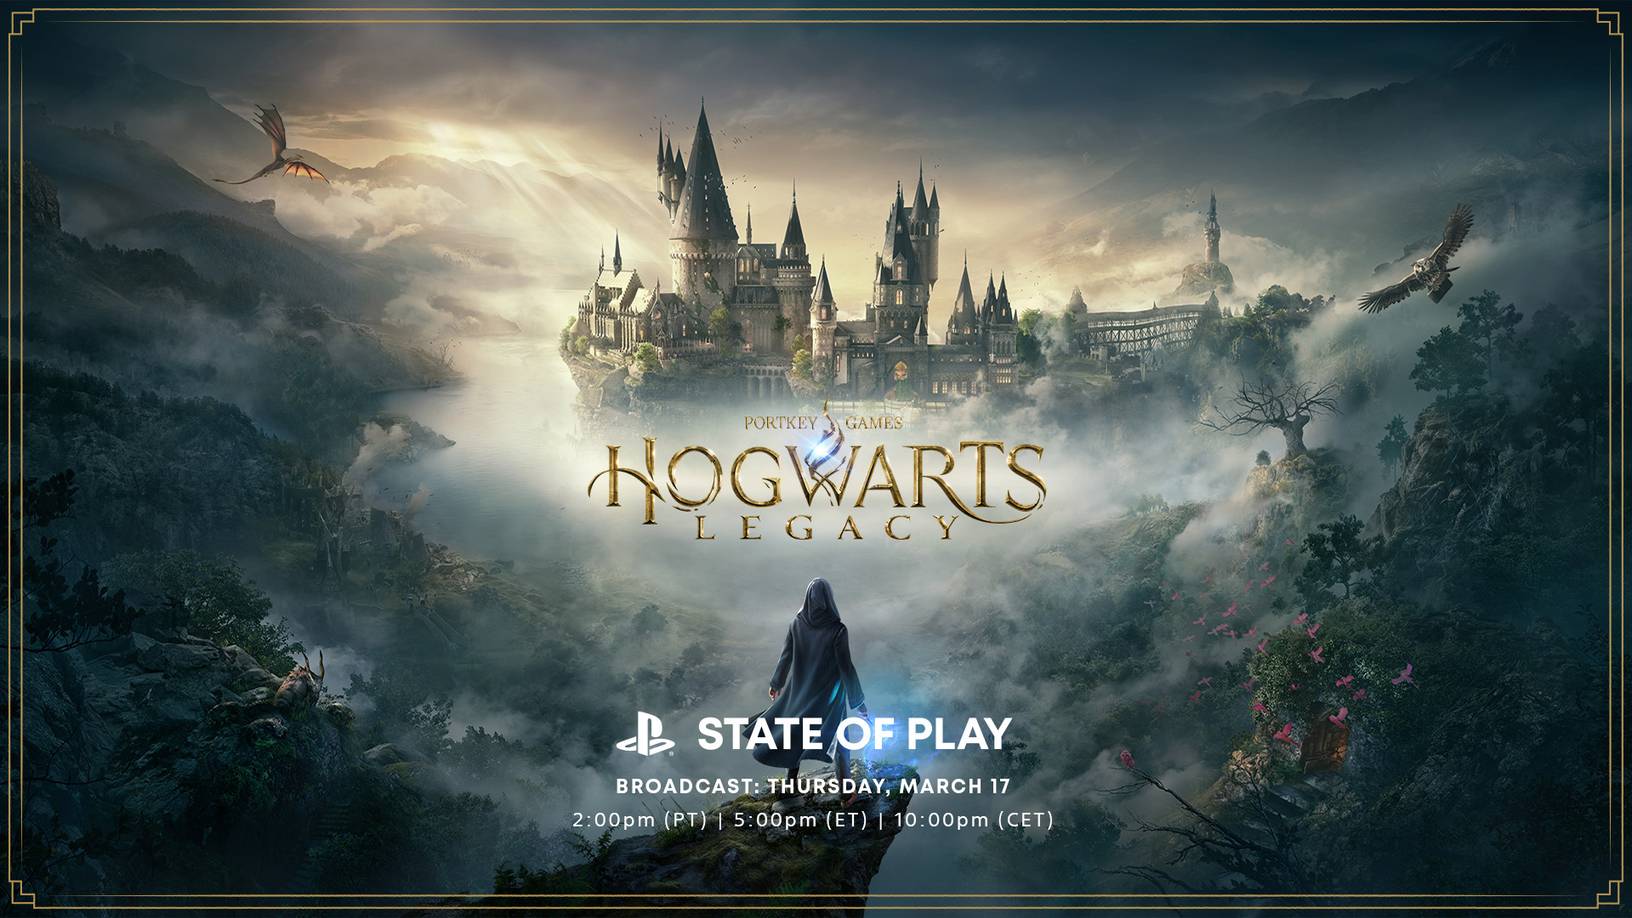 State of Play for Sony PlayStation, showcasing Hogwarts Legacy, has been set for March 17th.